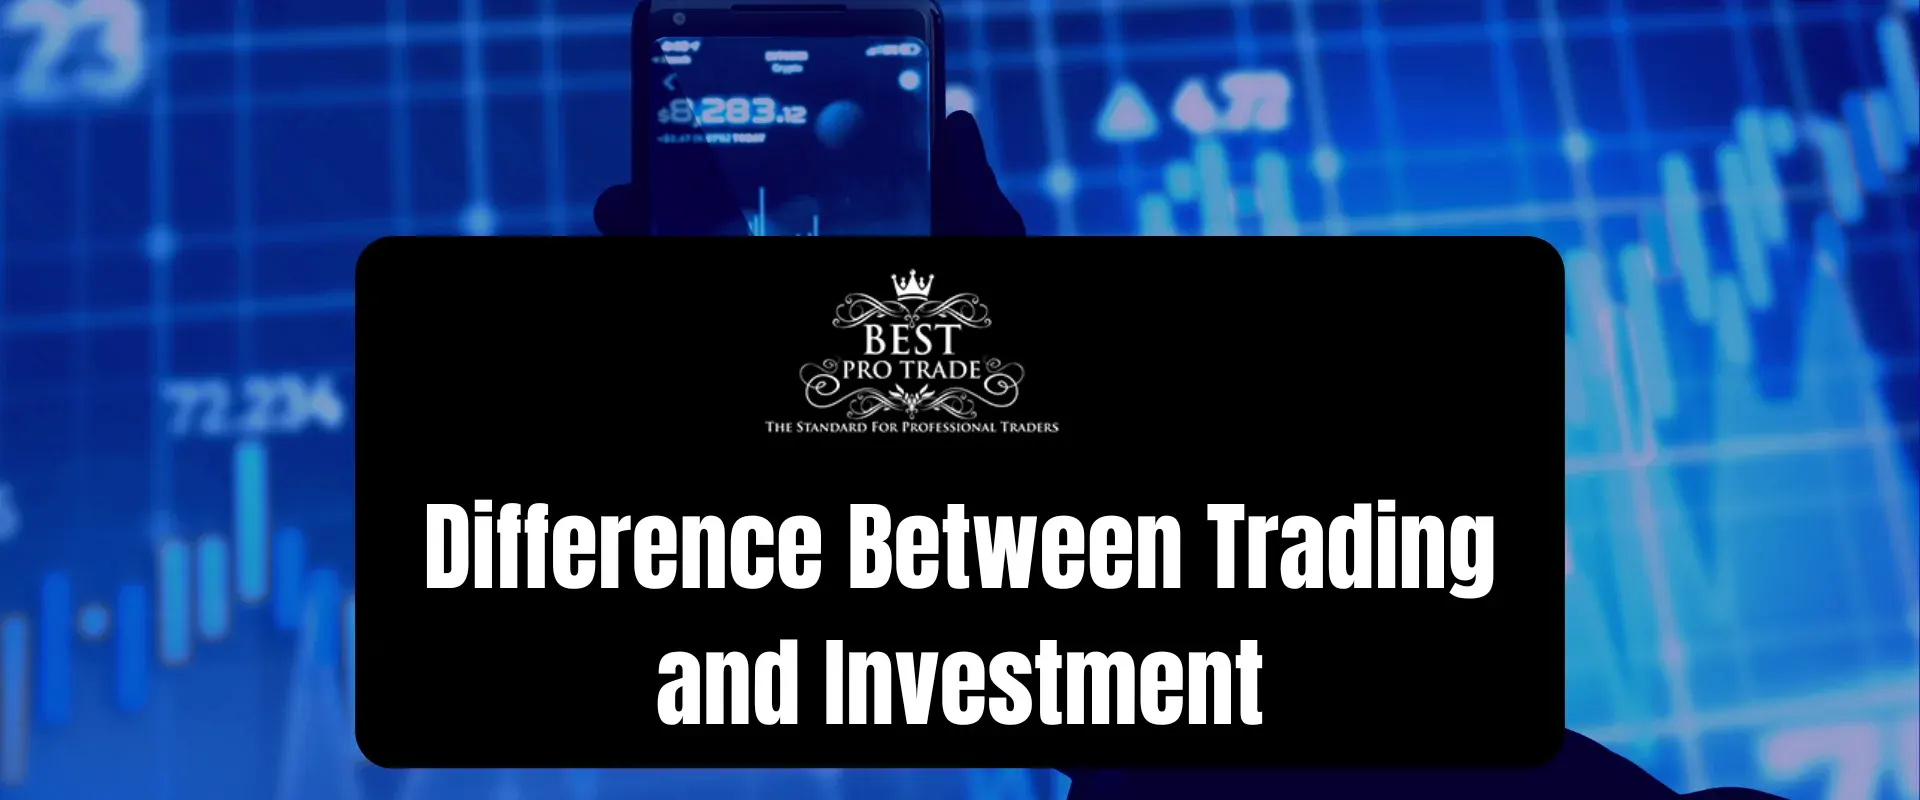 Difference Between Trading and Investment